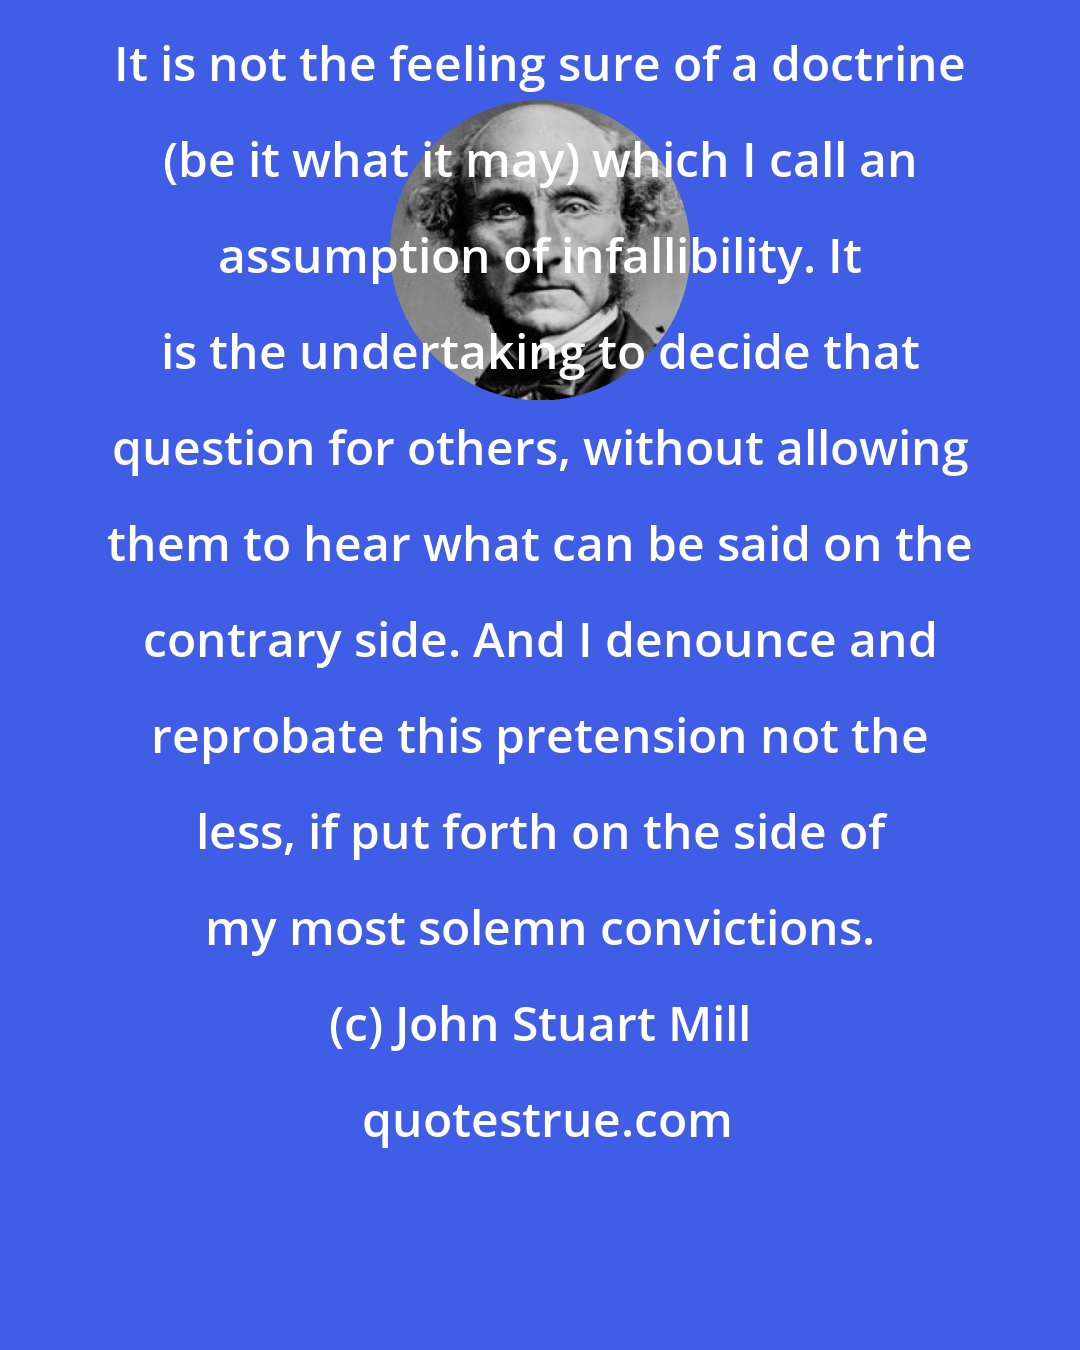 John Stuart Mill: It is not the feeling sure of a doctrine (be it what it may) which I call an assumption of infallibility. It is the undertaking to decide that question for others, without allowing them to hear what can be said on the contrary side. And I denounce and reprobate this pretension not the less, if put forth on the side of my most solemn convictions.